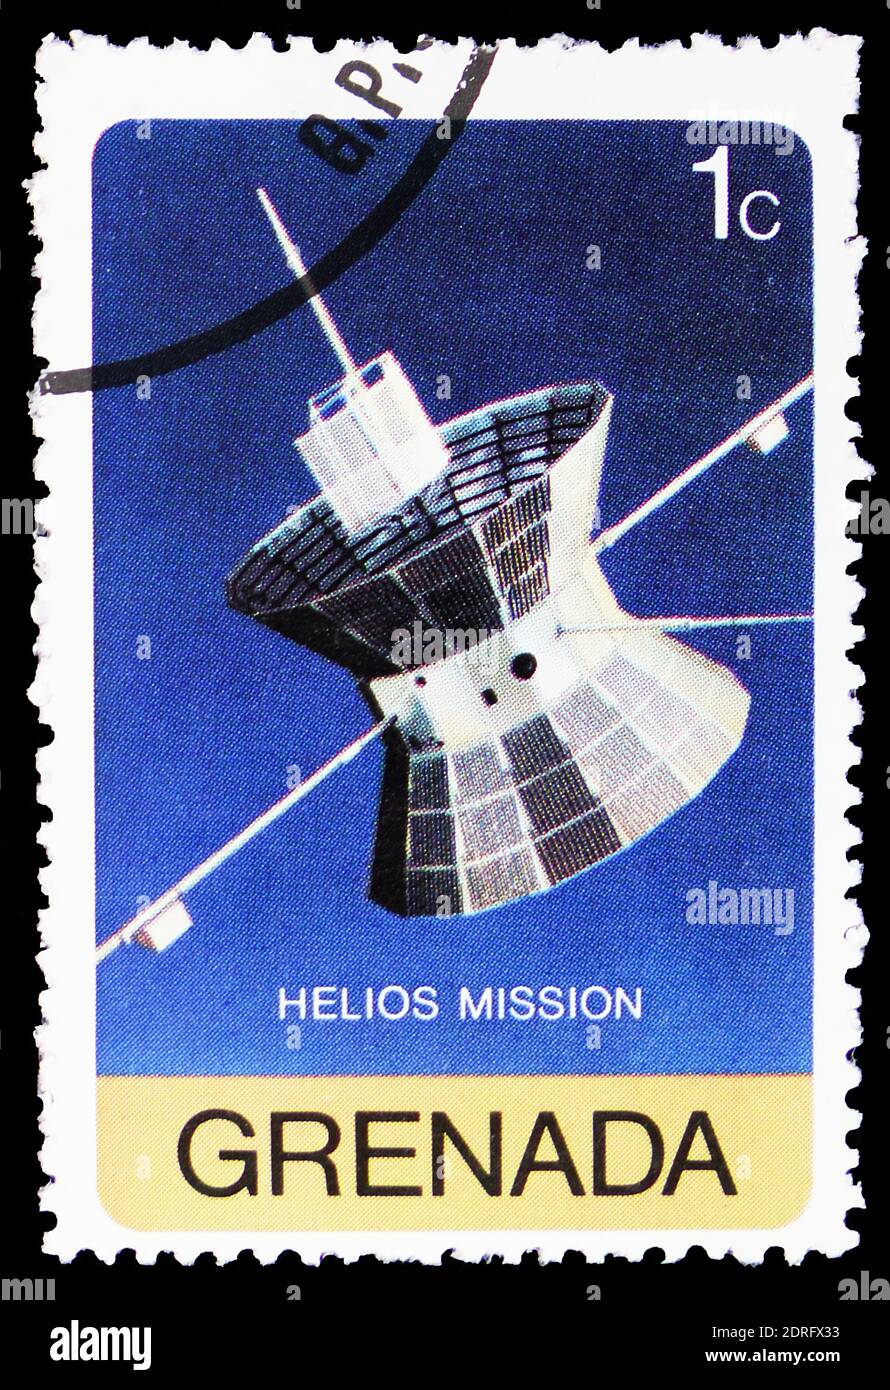 MOSCOW, RUSSIA - FEBRUARY 9, 2019: A stamp printed in Grenada shows Helios satellite, Viking and Helios space missions serie, circa 1976 Stock Photo